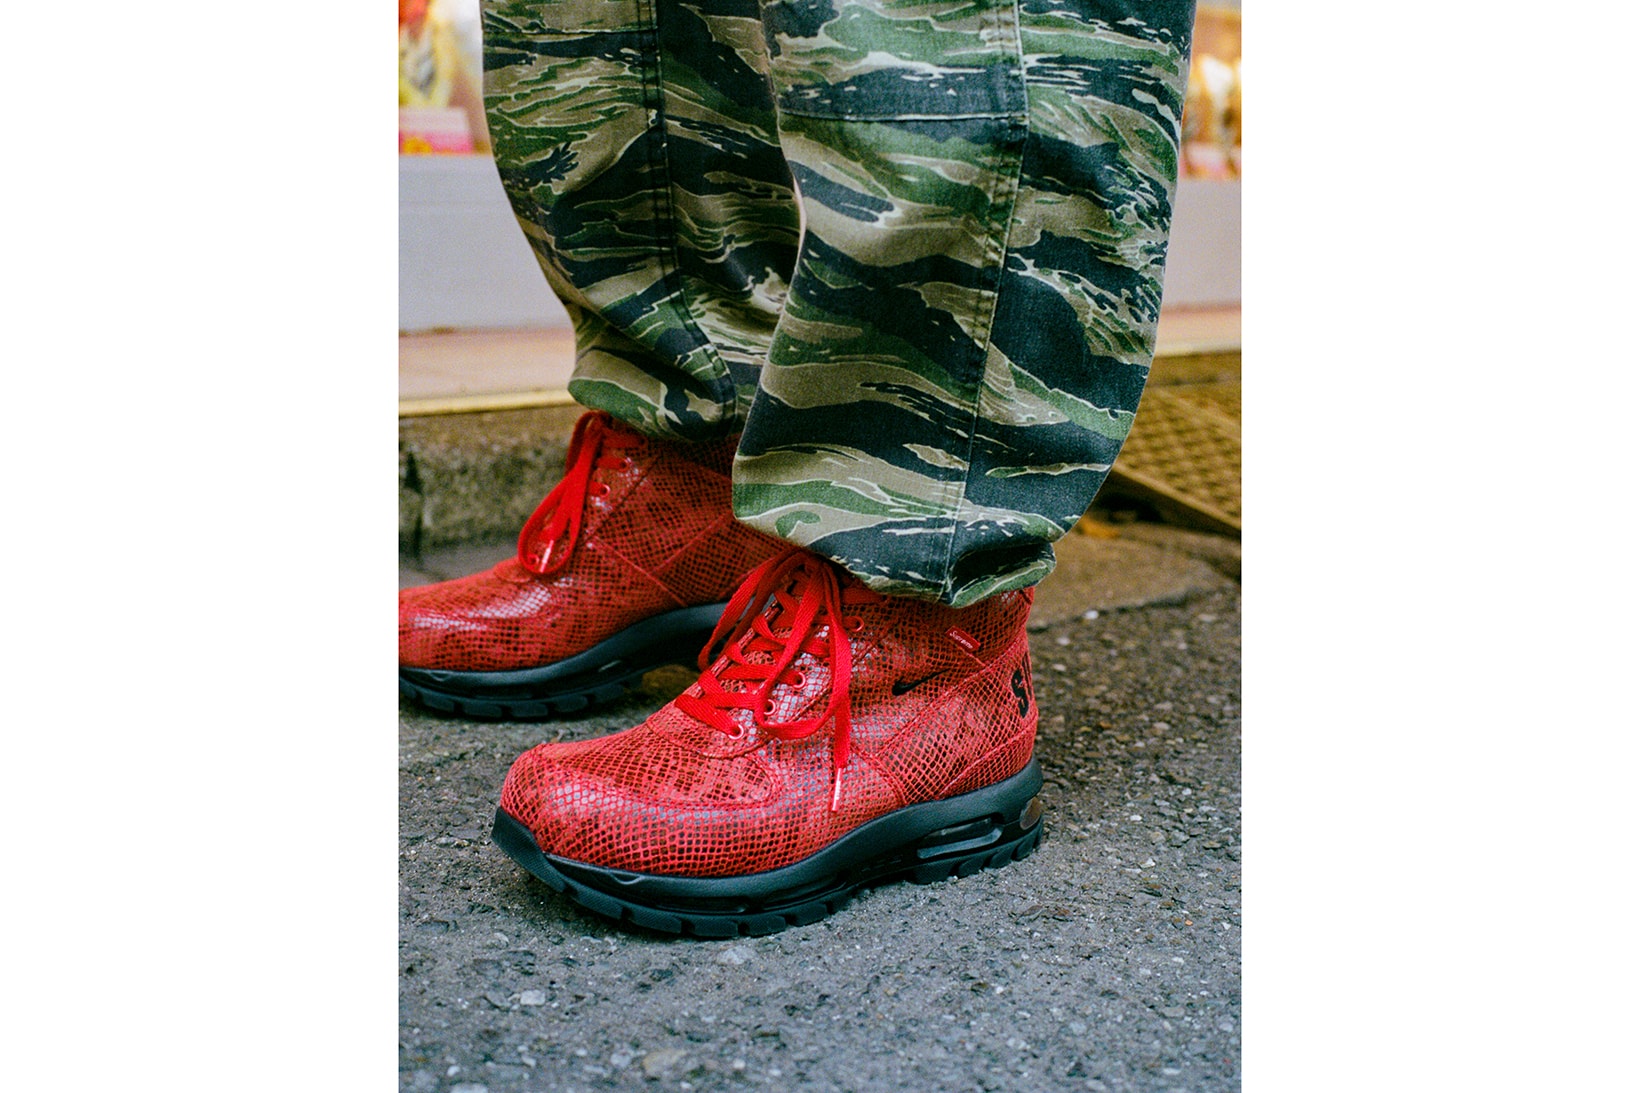 supreme nike goadome collaboration boots footwear shoes snakeskin red colorway camo plants laces